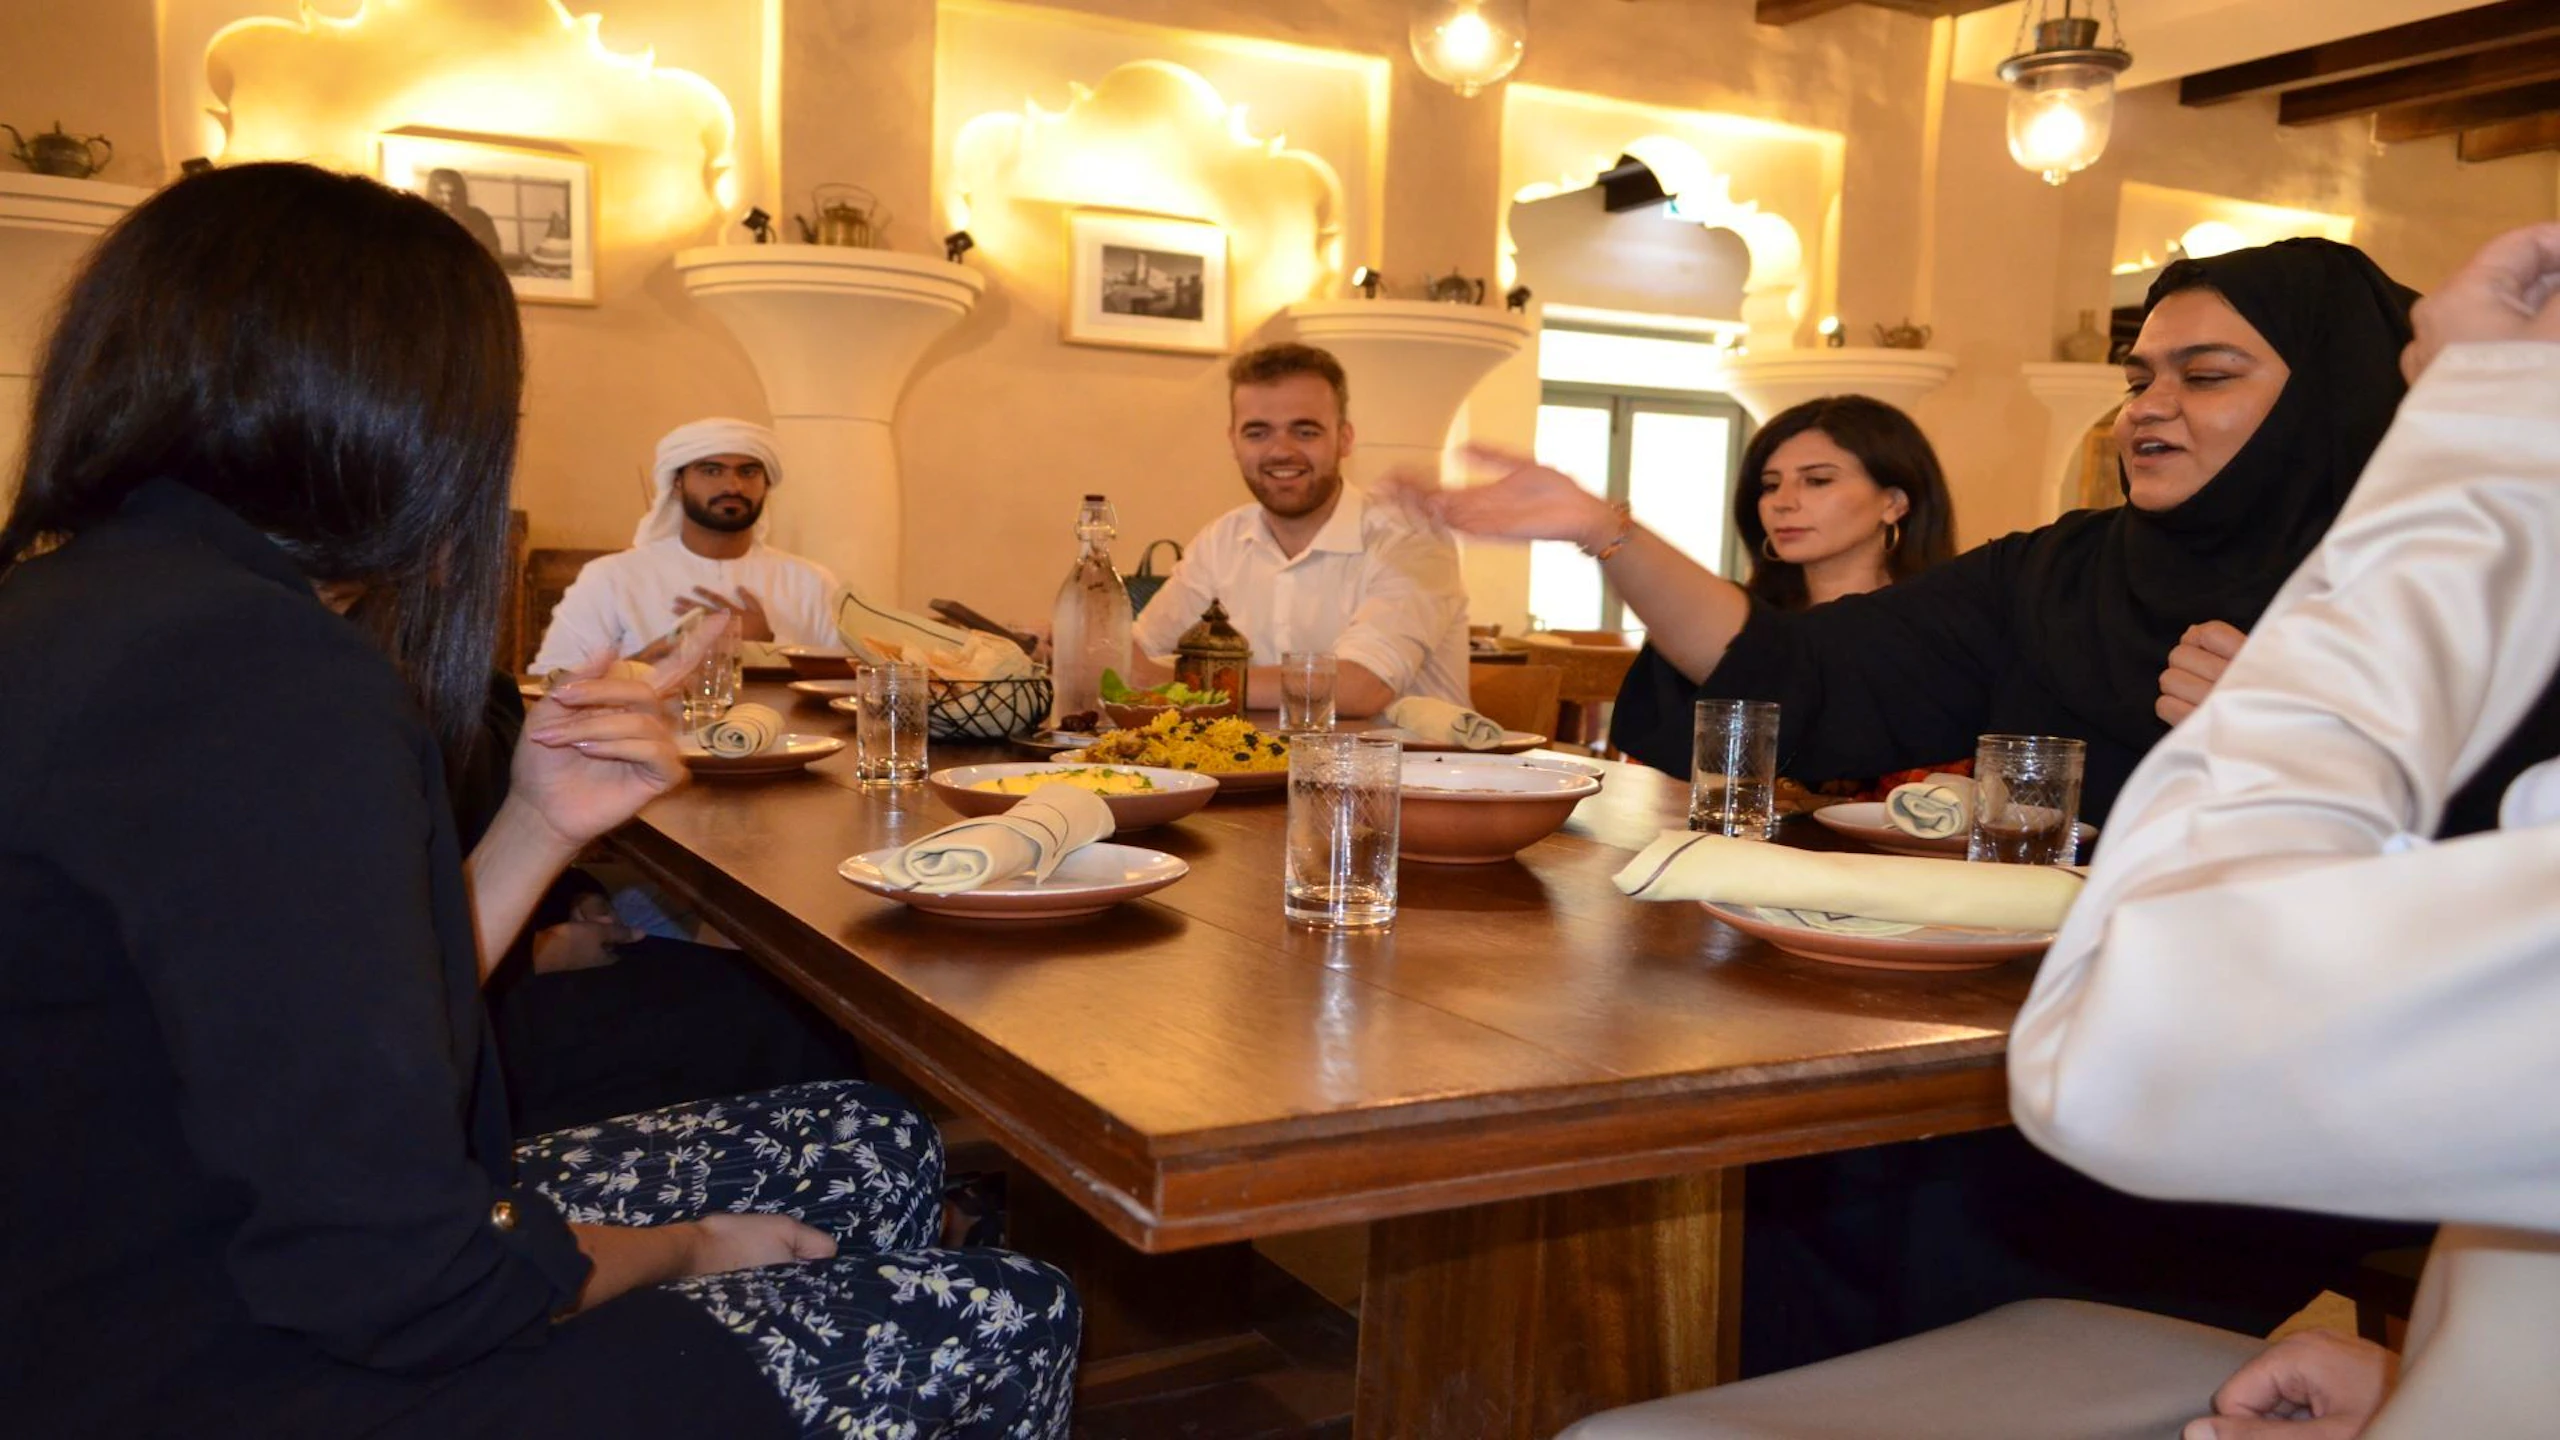 Meet The Locals - Indulge in an Emirati lunch with the locals Category